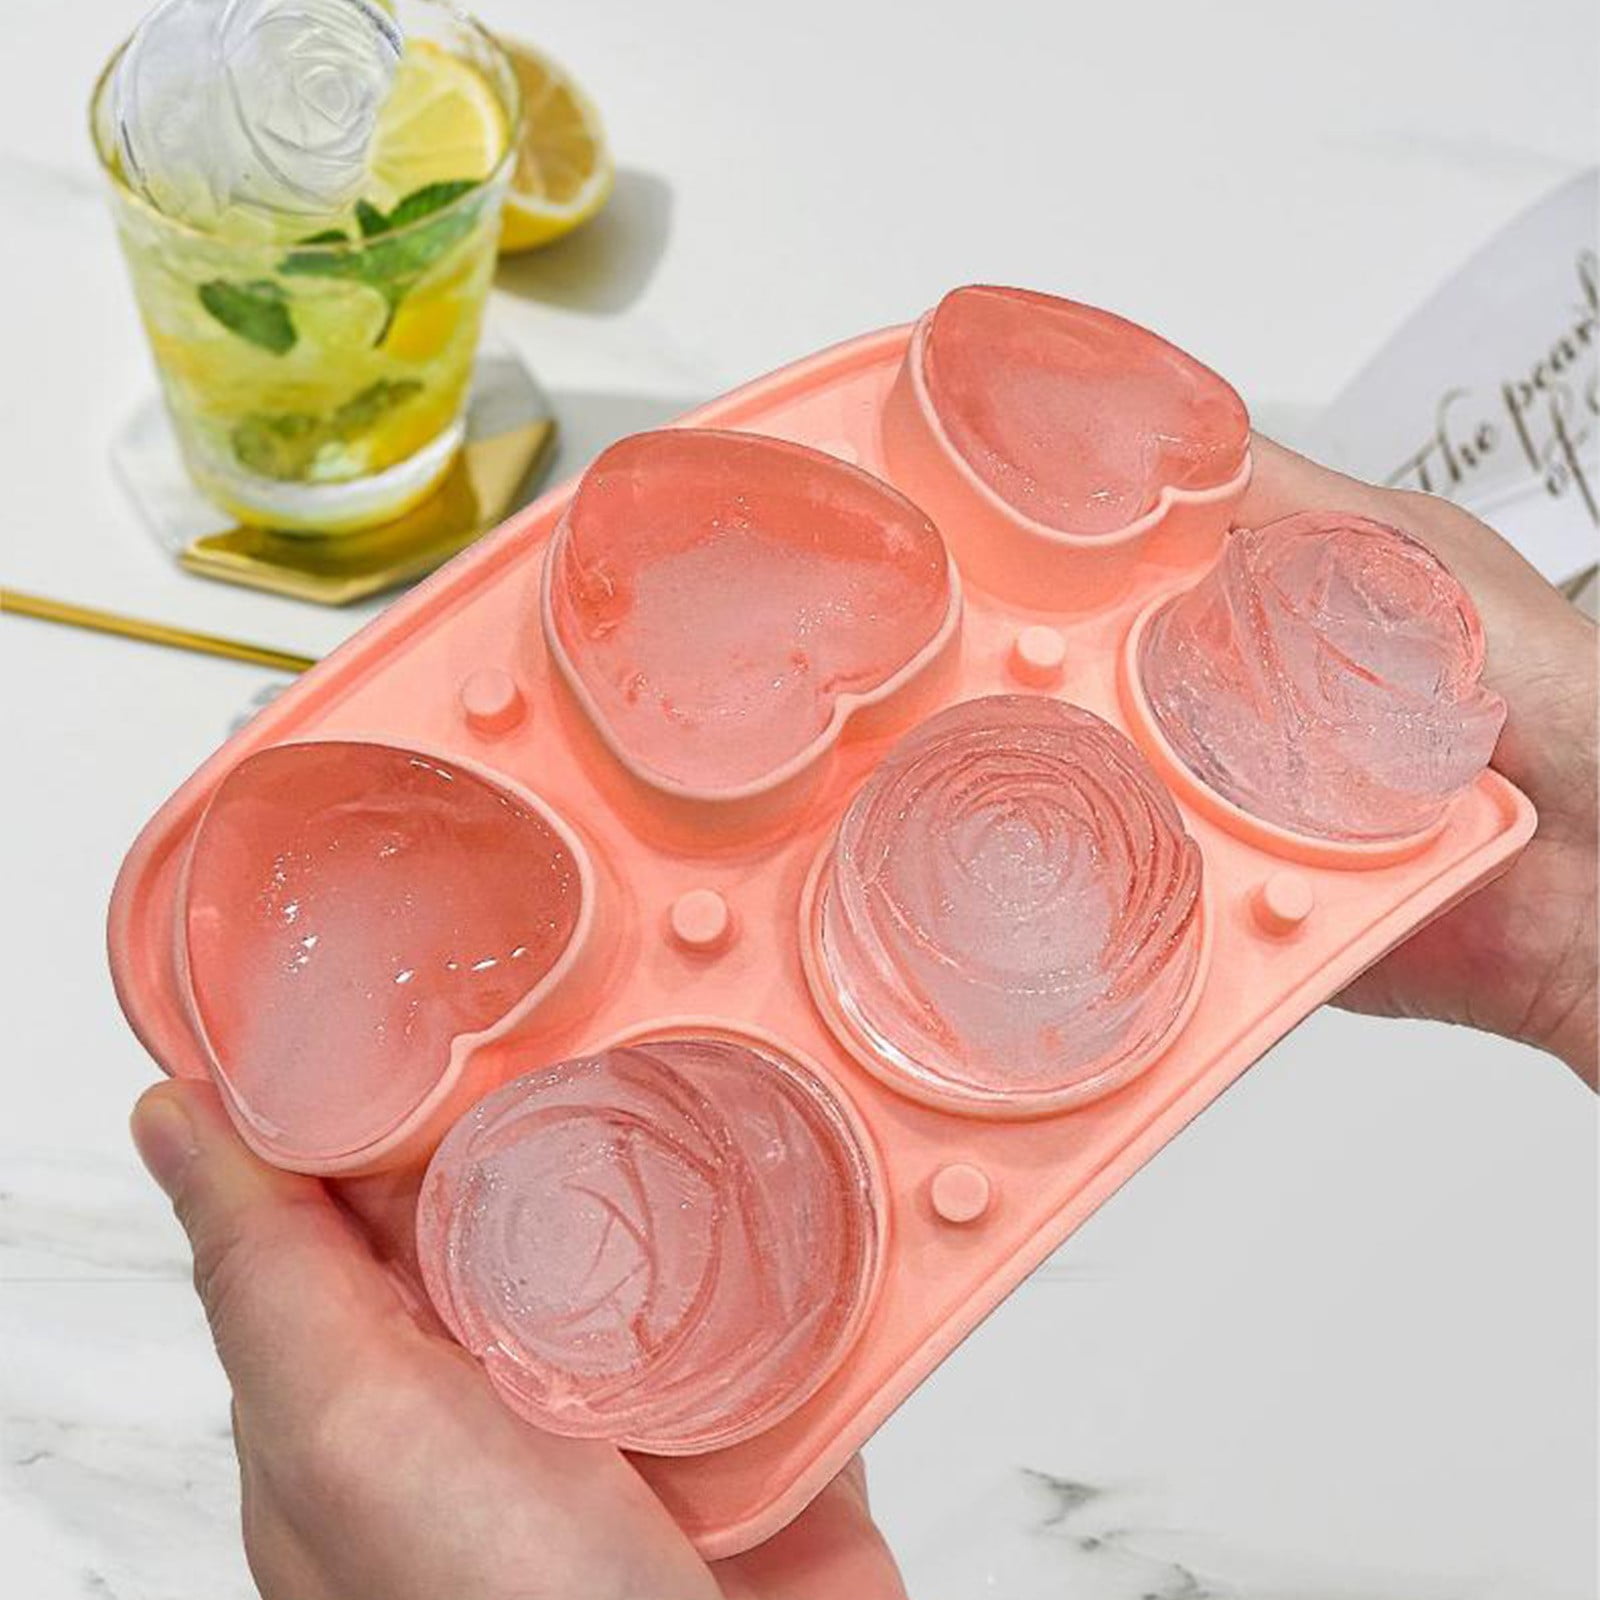 Yannee 1 Pcs 6 Cavity Ice Tray,Square Silicone Ice Molds,Ice Cube